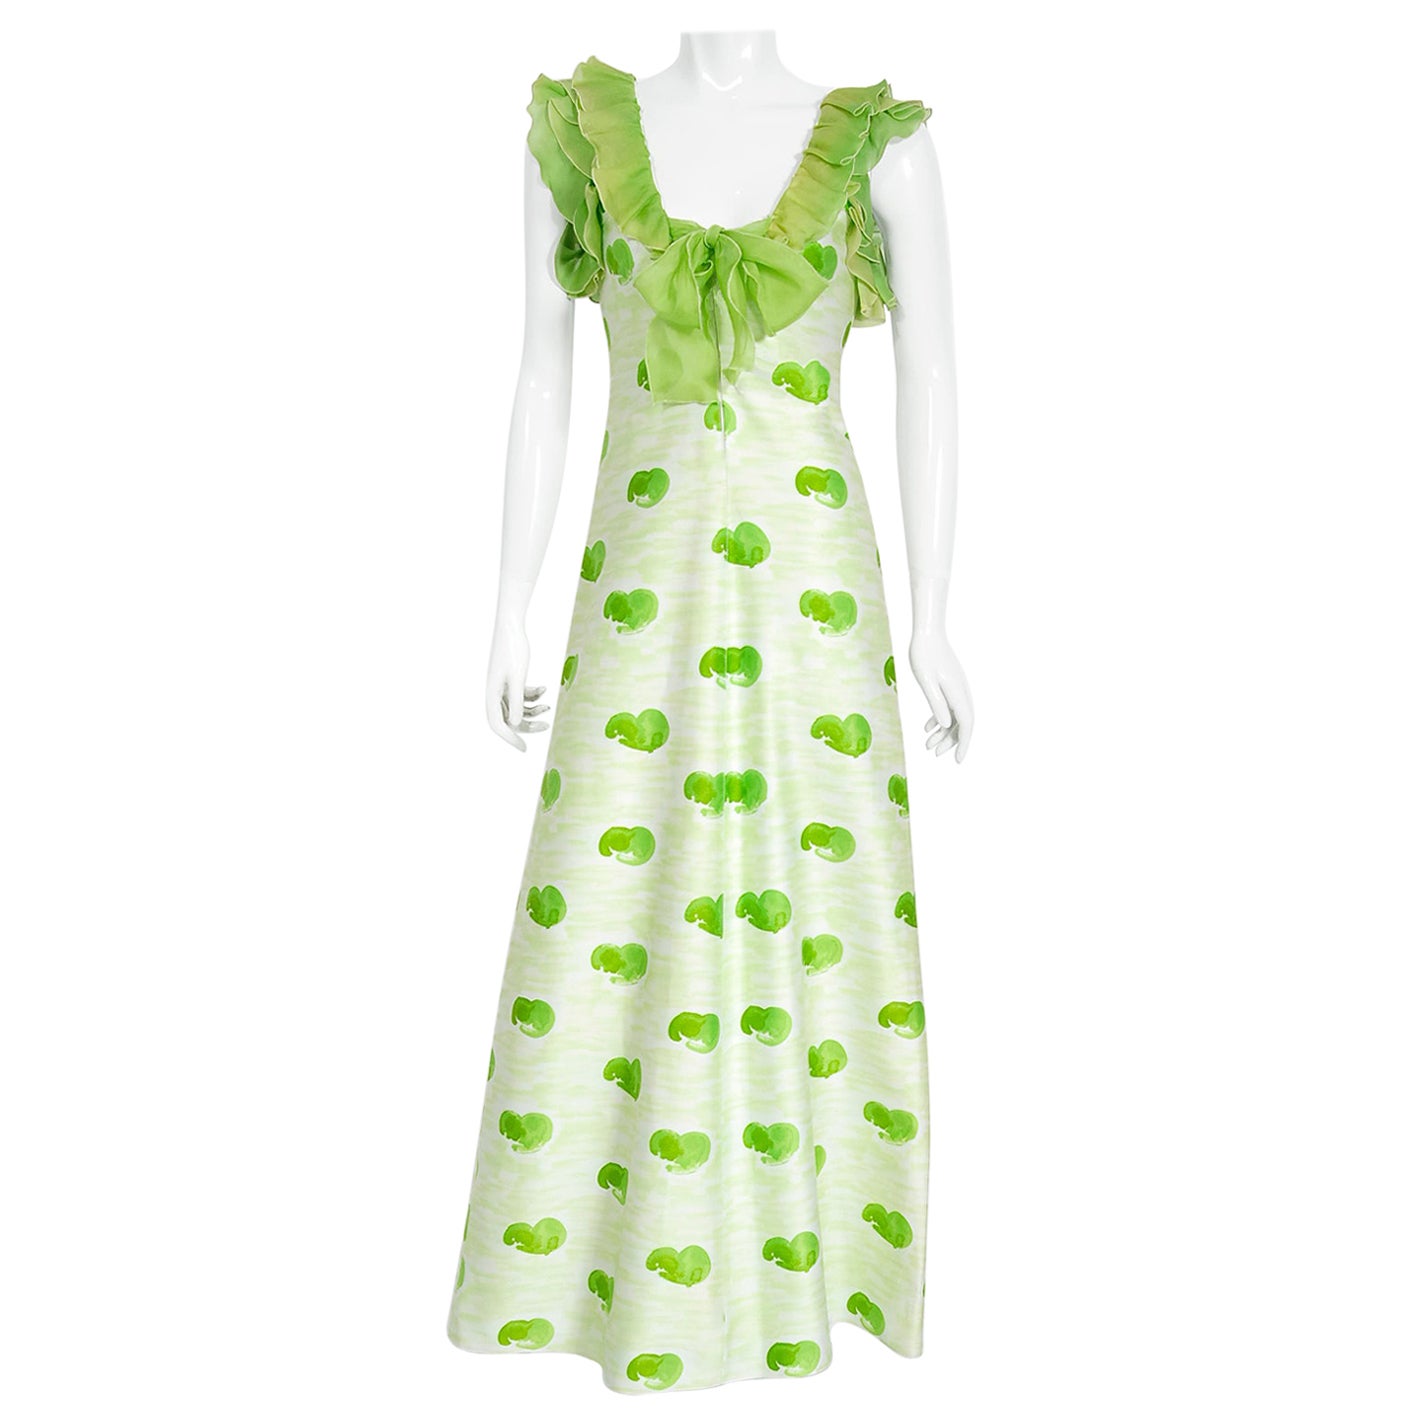 Vintage 1974 Courreges Documented Green Print Cotton & Ruffle Organza Maxi Dress